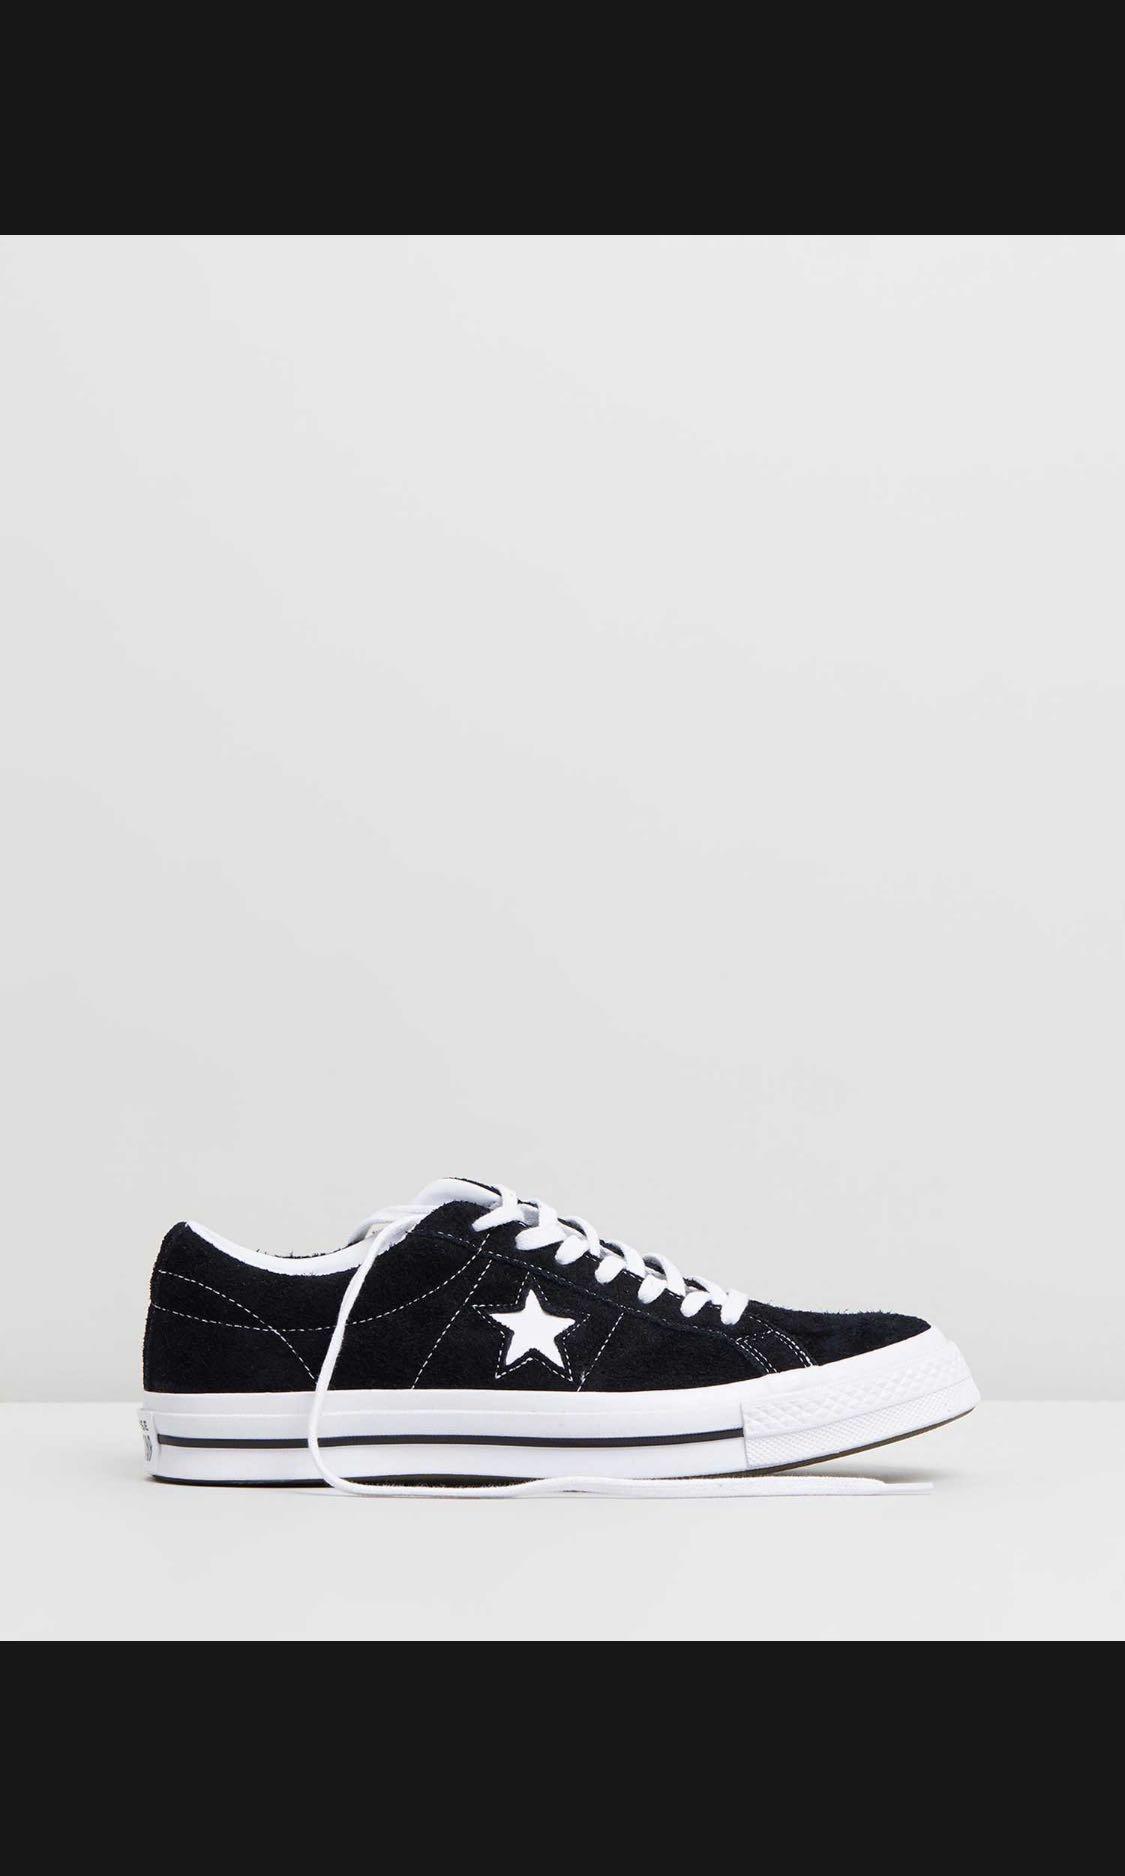 converse one star size